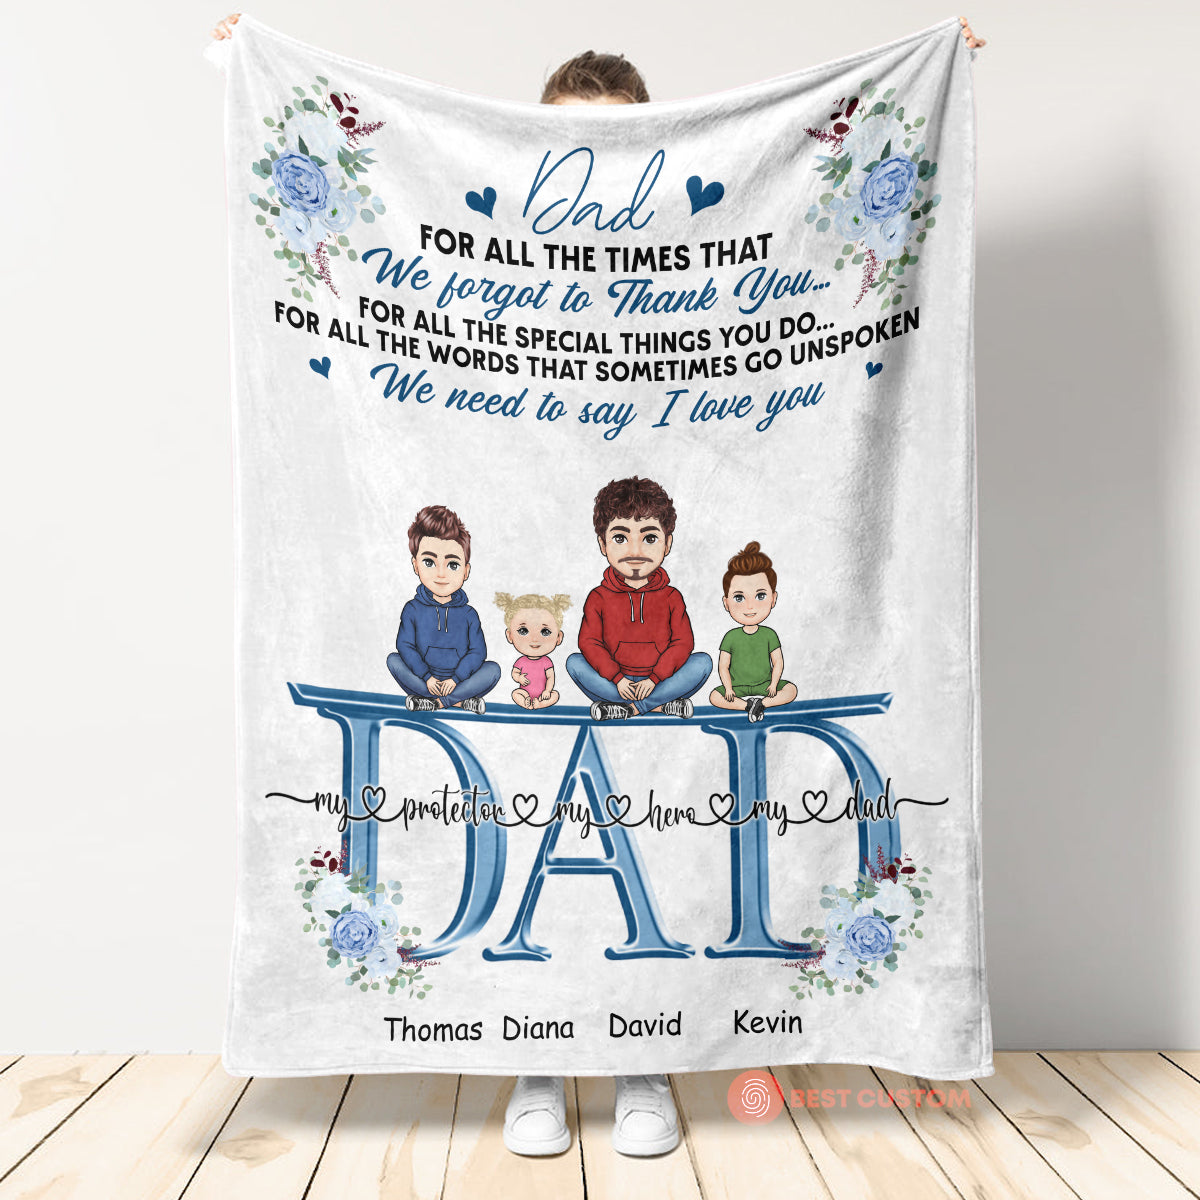 We Need To Say We Love You - Personalized Blanket - Gift For Father, Dad, Grandpa, Father's Day